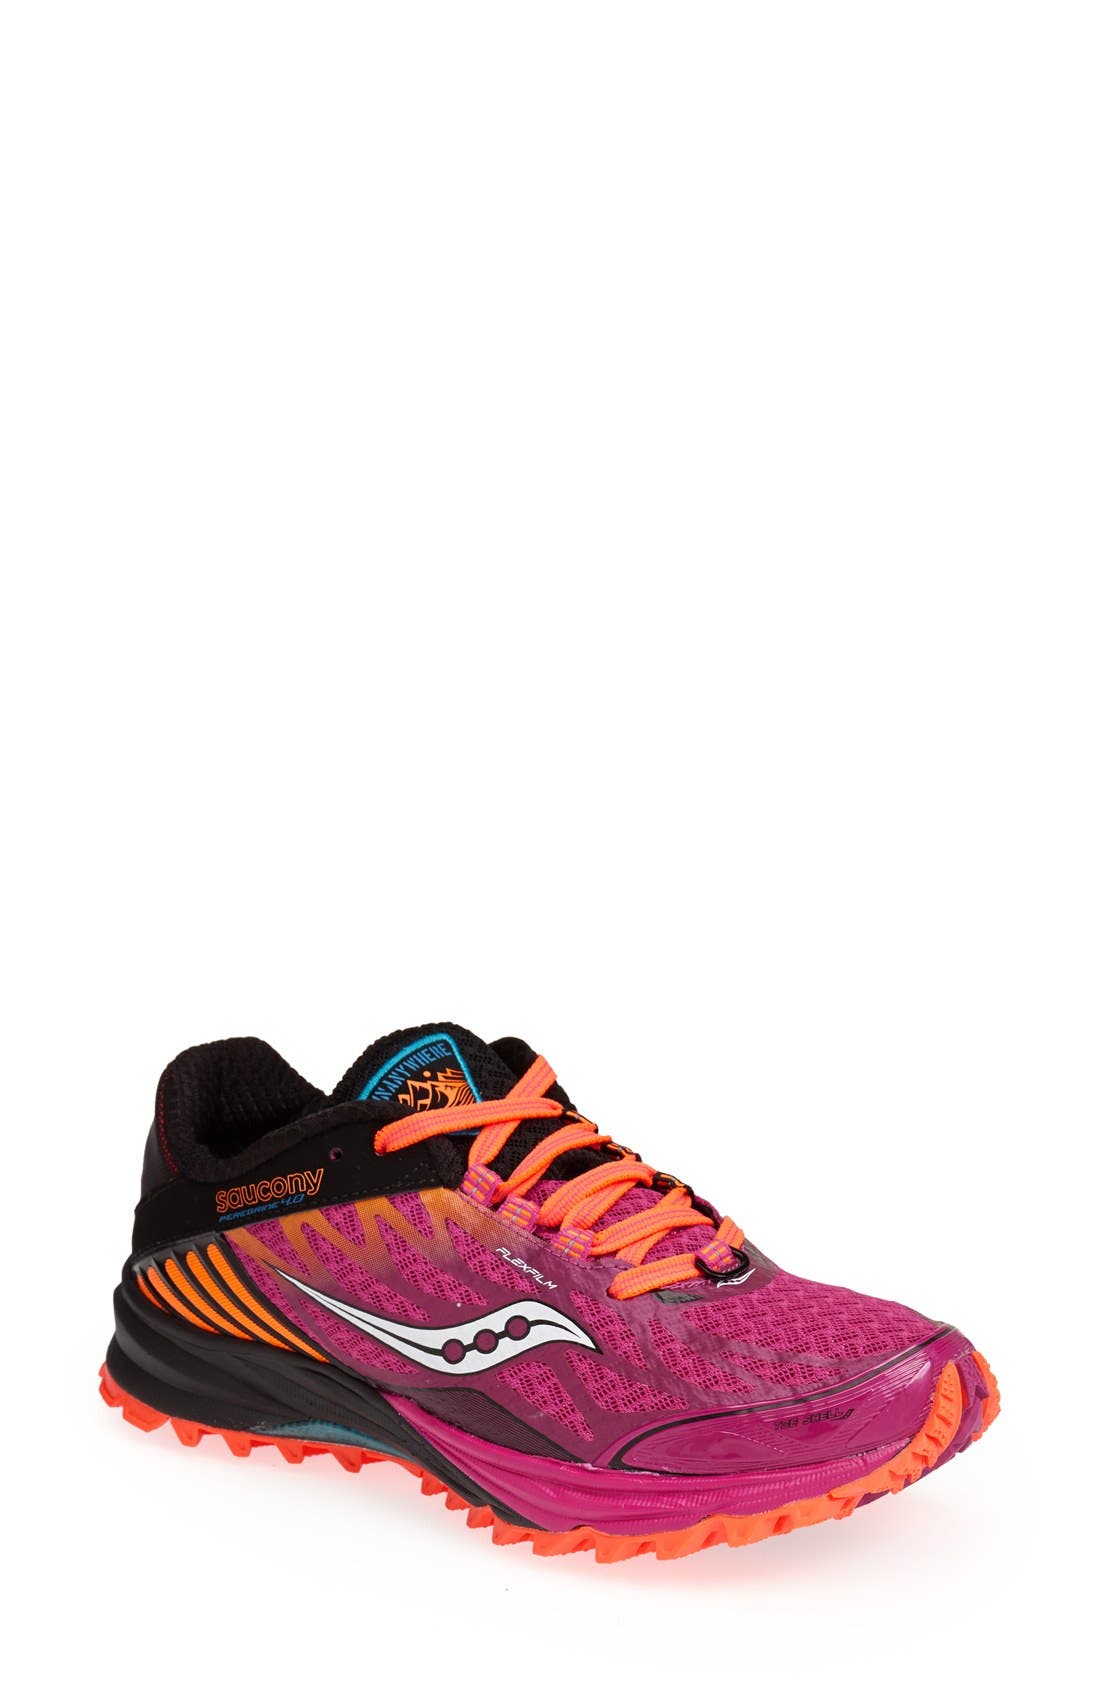 saucony peregrine 4 women's trail running shoes aw14